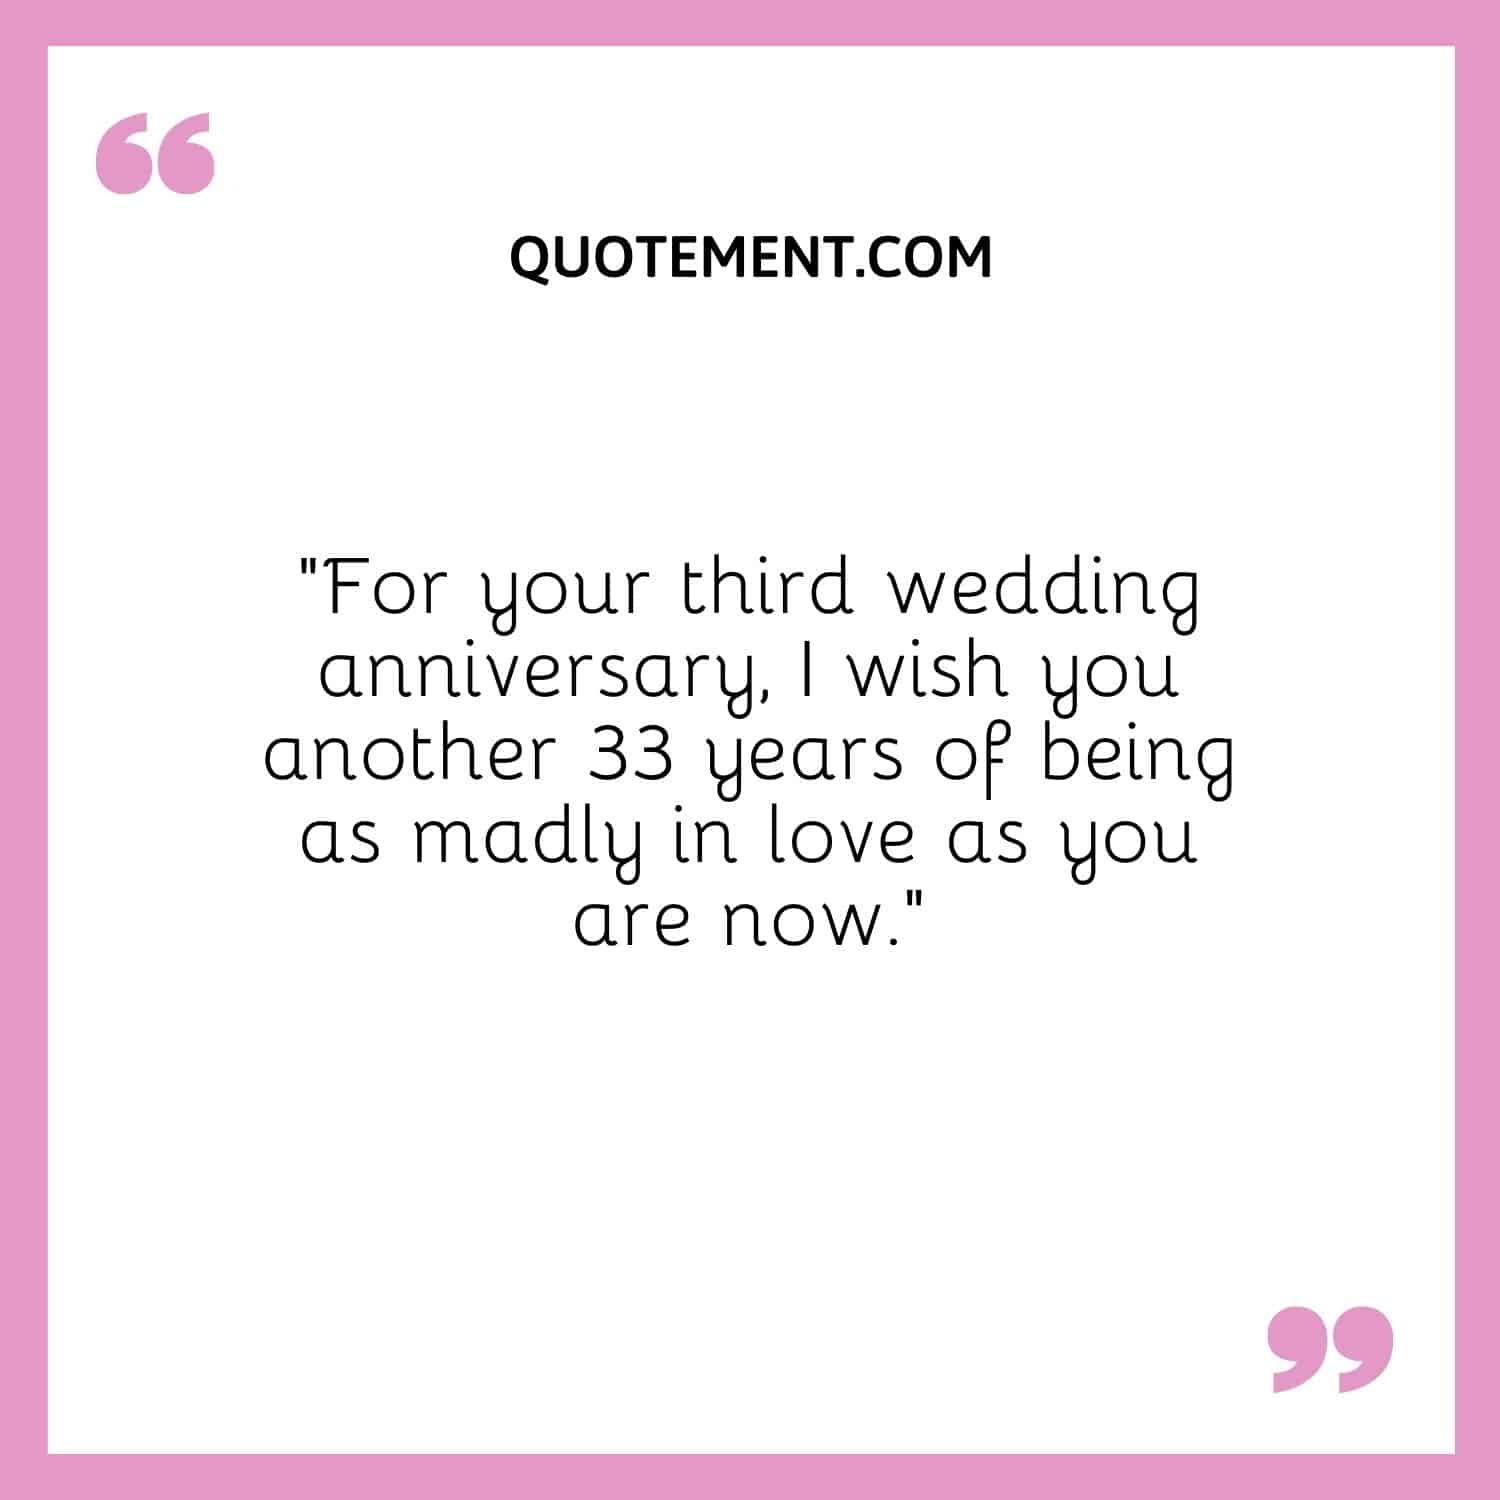 “For your third wedding anniversary, I wish you another 33 years of being as madly in love as you are now.”